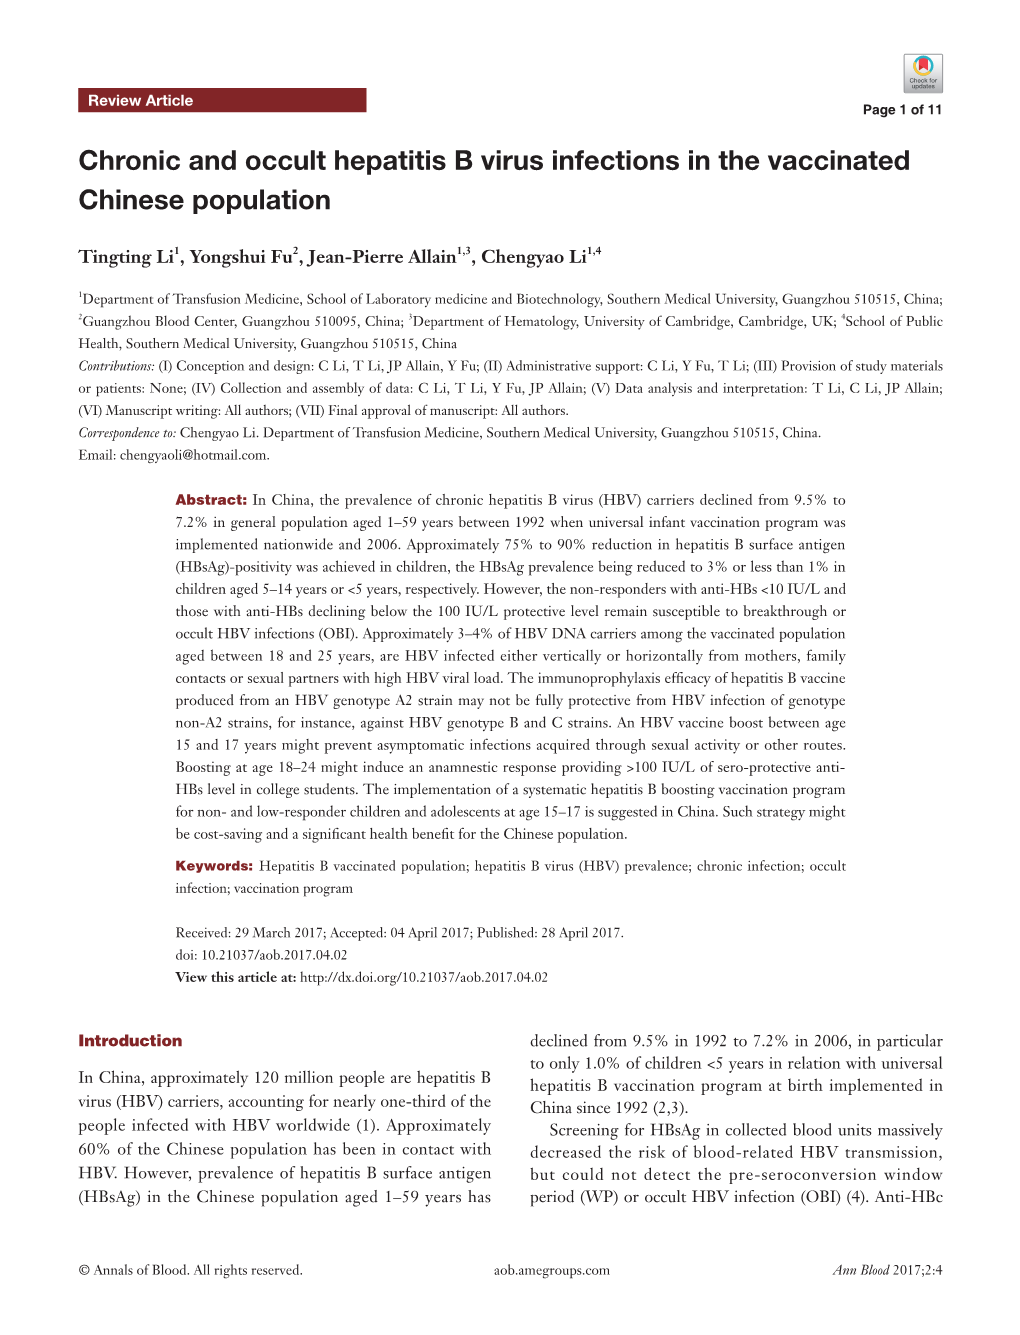 Chronic and Occult Hepatitis B Virus Infections in the Vaccinated Chinese Population